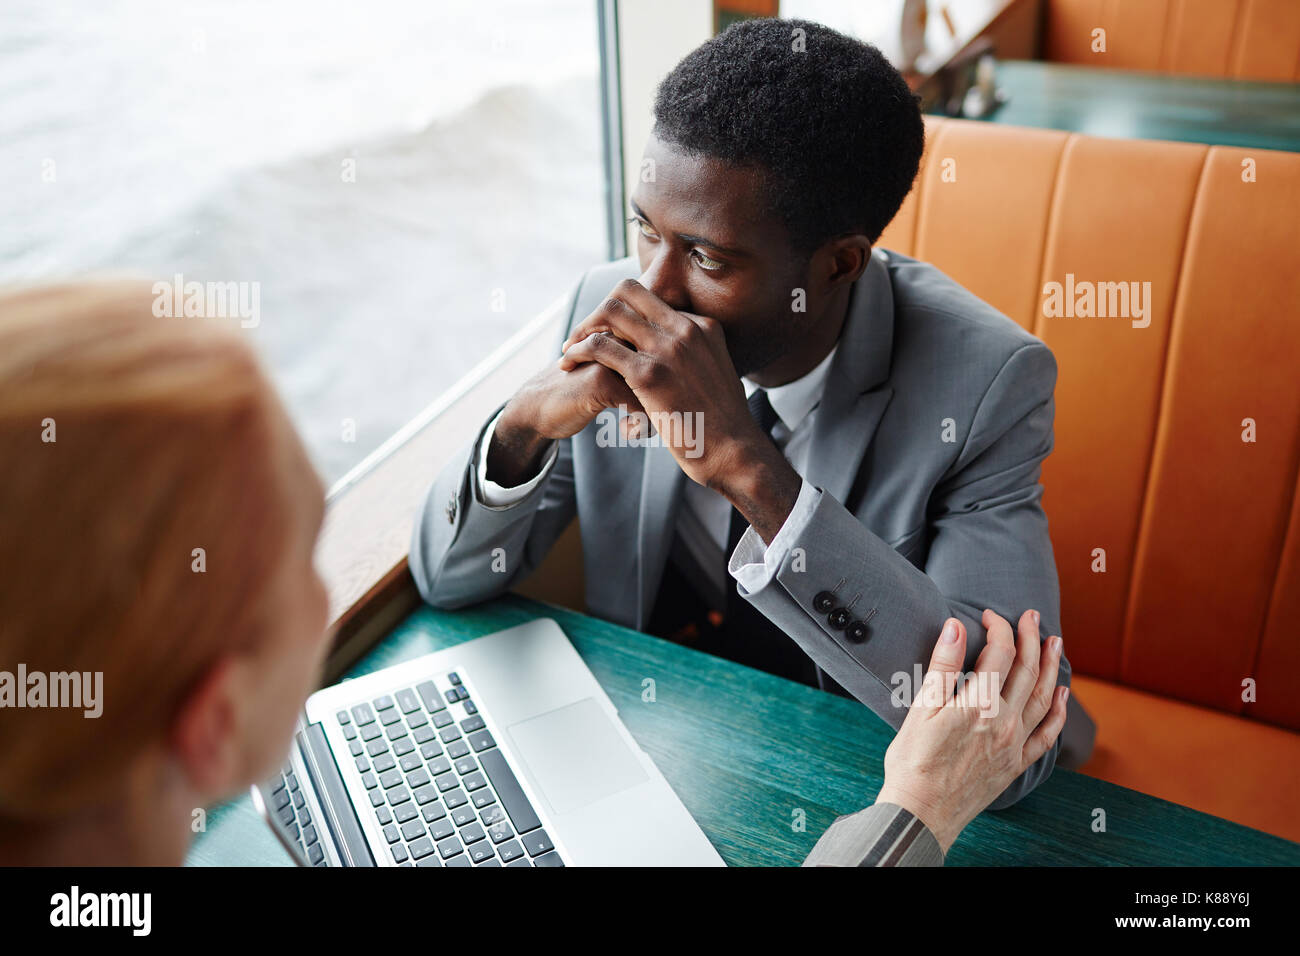 Businesswoman reassuring her stressed colleague during business travel Stock Photo